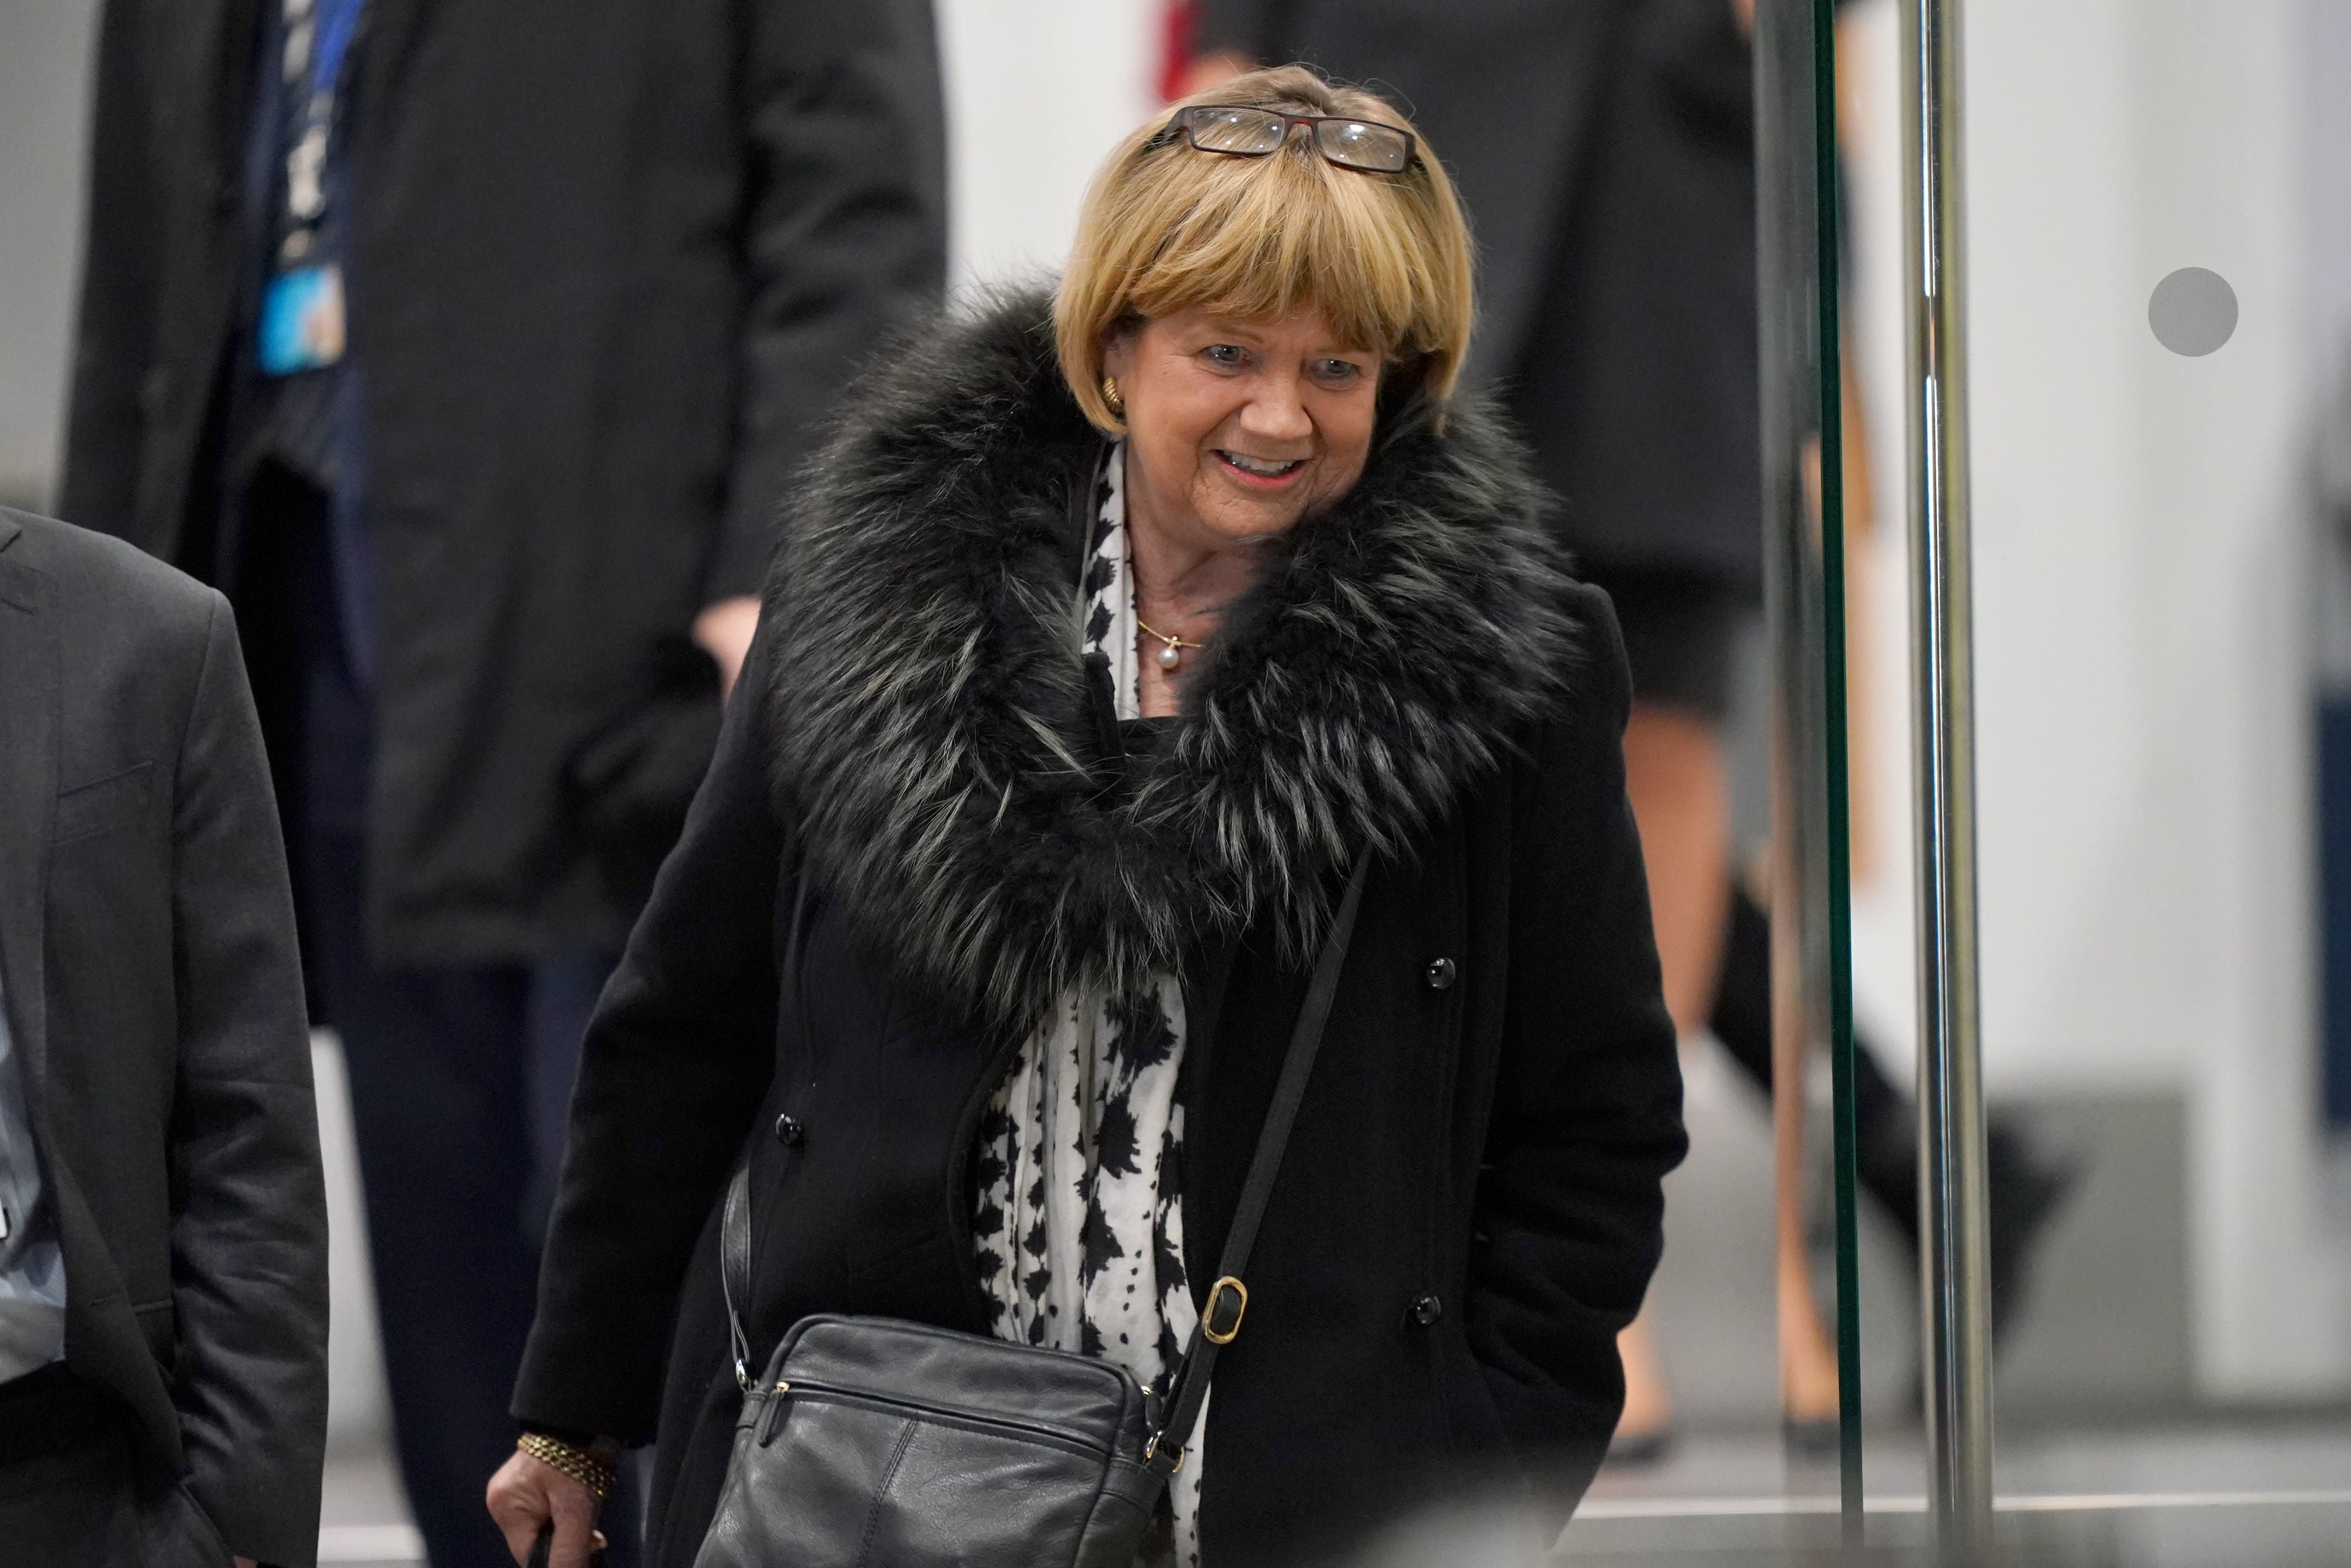 Chair of Covid-19 Inquiry Baroness Heather Carol Hallett leaves Dorland House in London after former prime minister Boris Johnson gave evidence